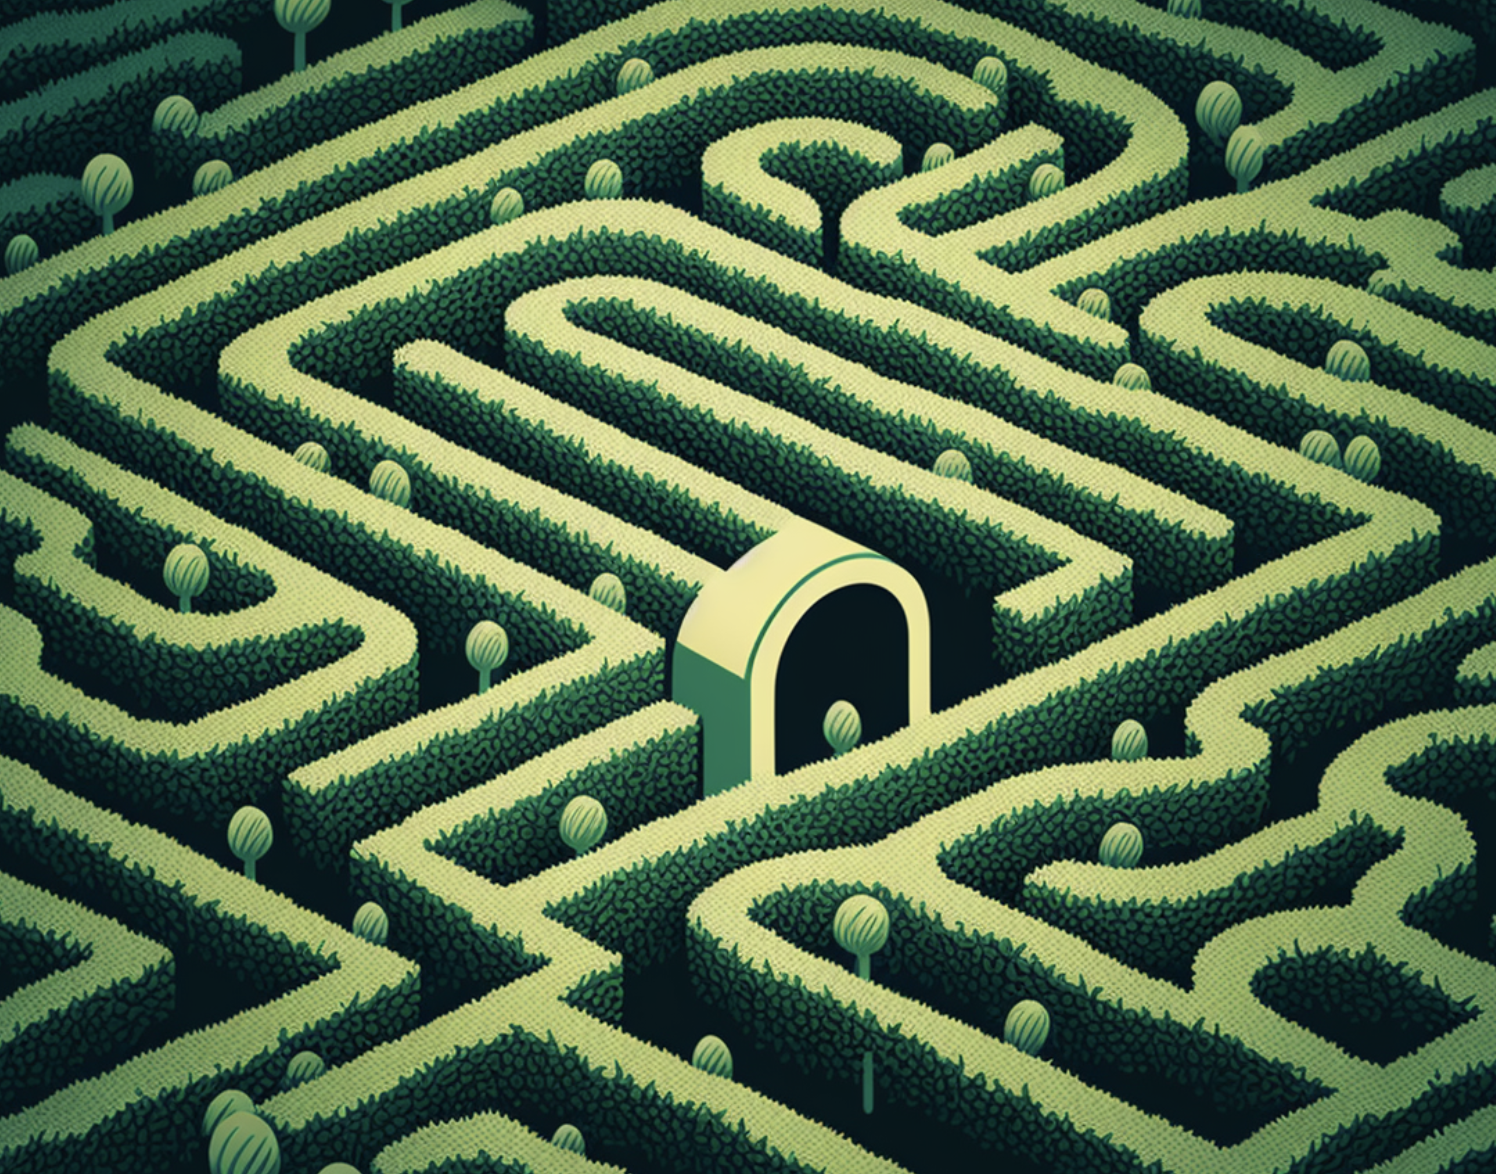 graphic illustration of a garden maze with a door in the center